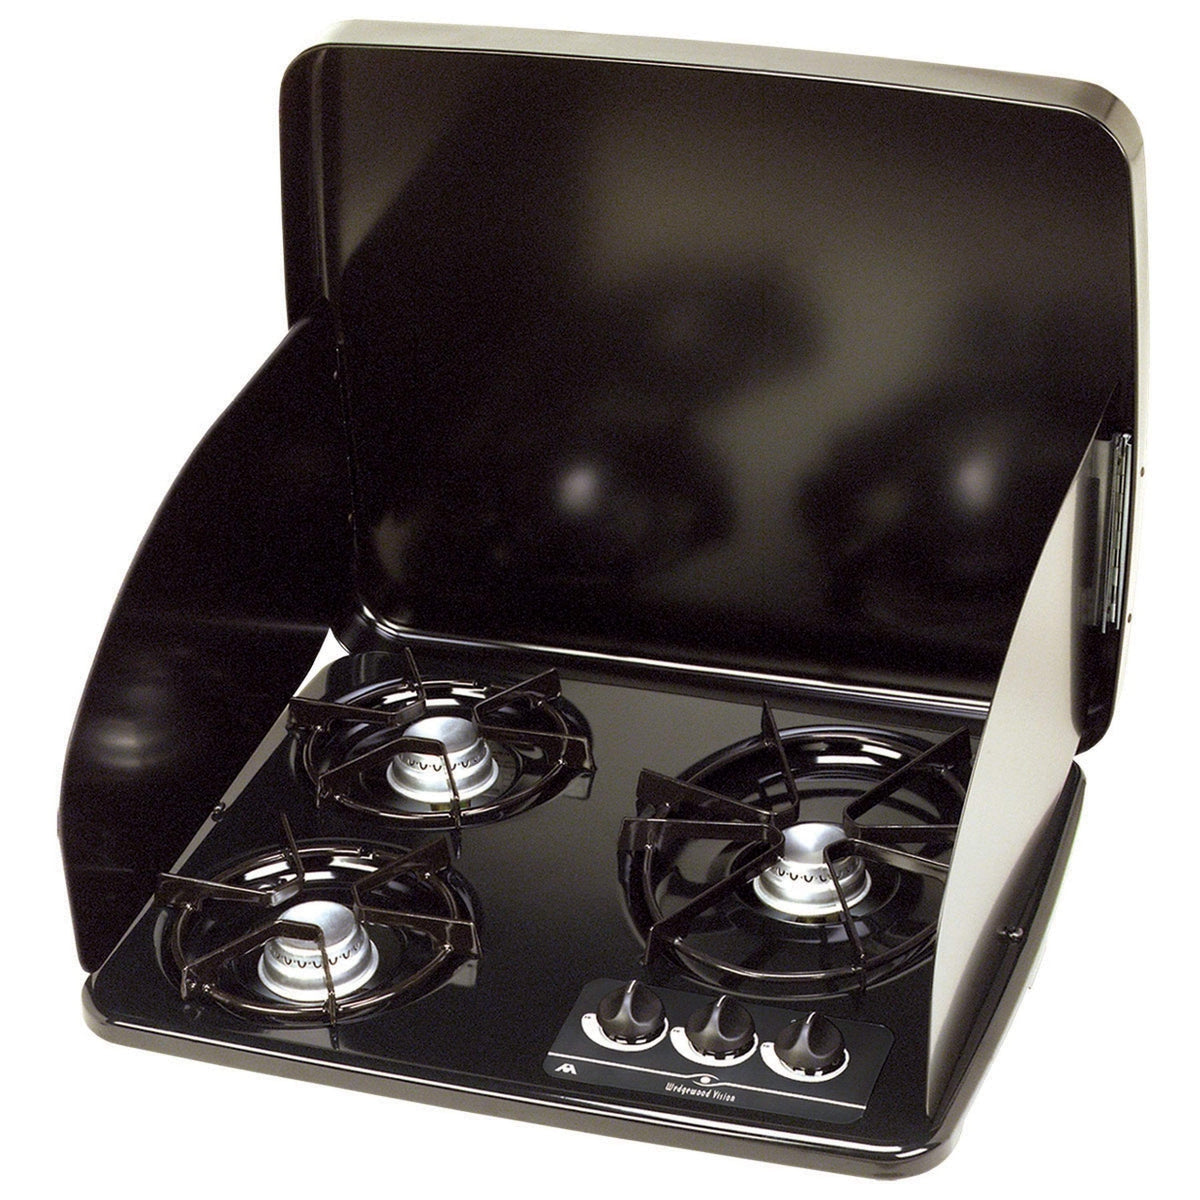 Atwood Mobile Products Not Qualified for Free Shipping Atwood 2-Burner Cooktop Cover SS #56459